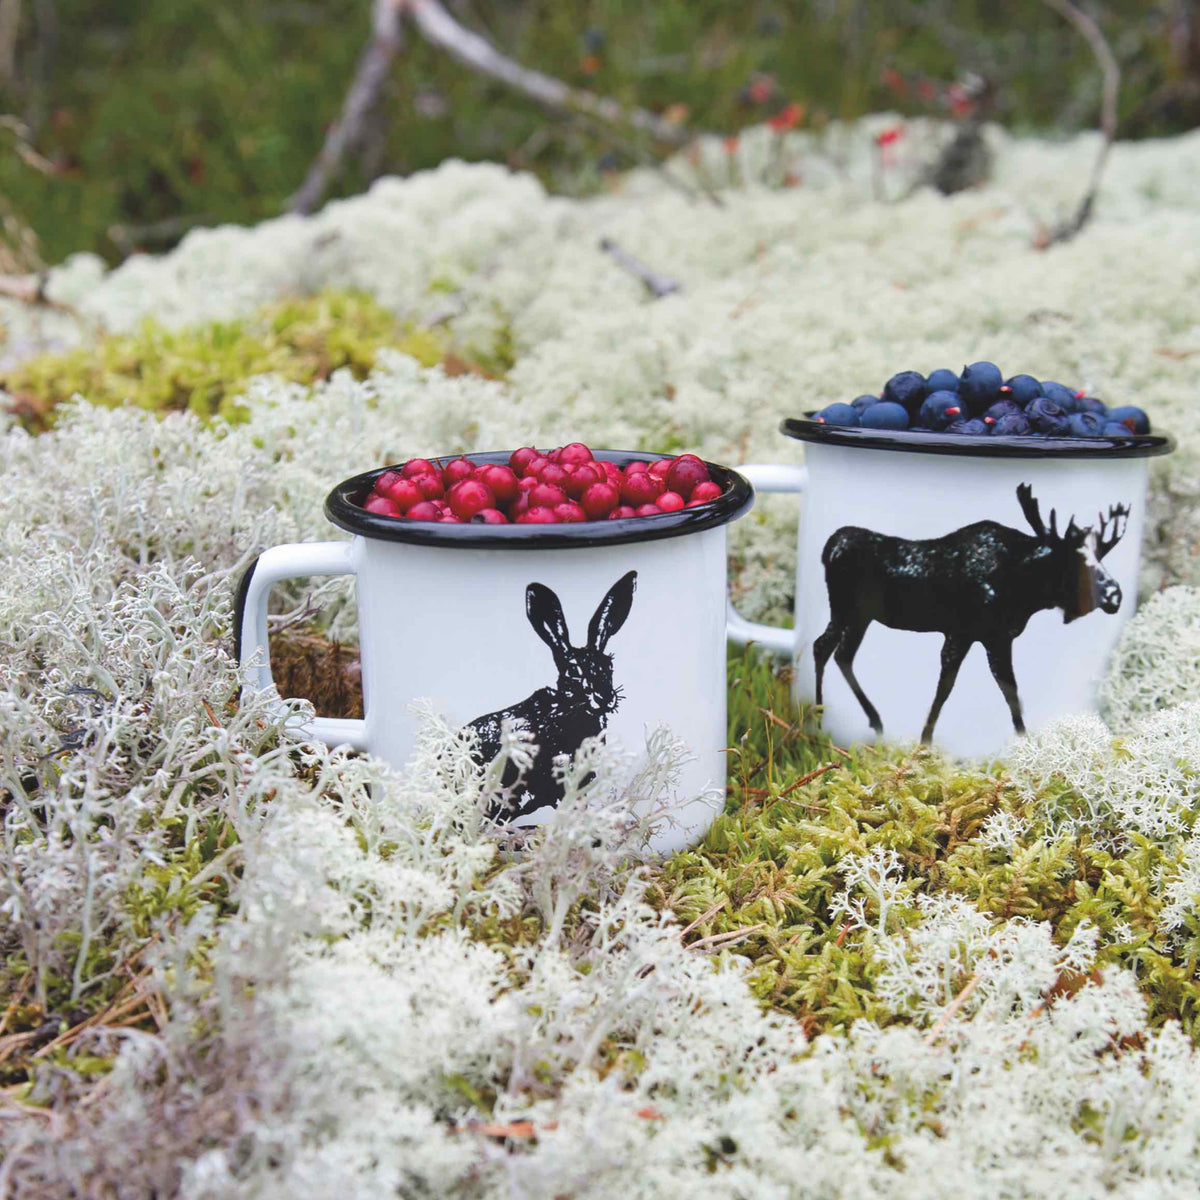 Muurla Design Enamelware outside in a country setting